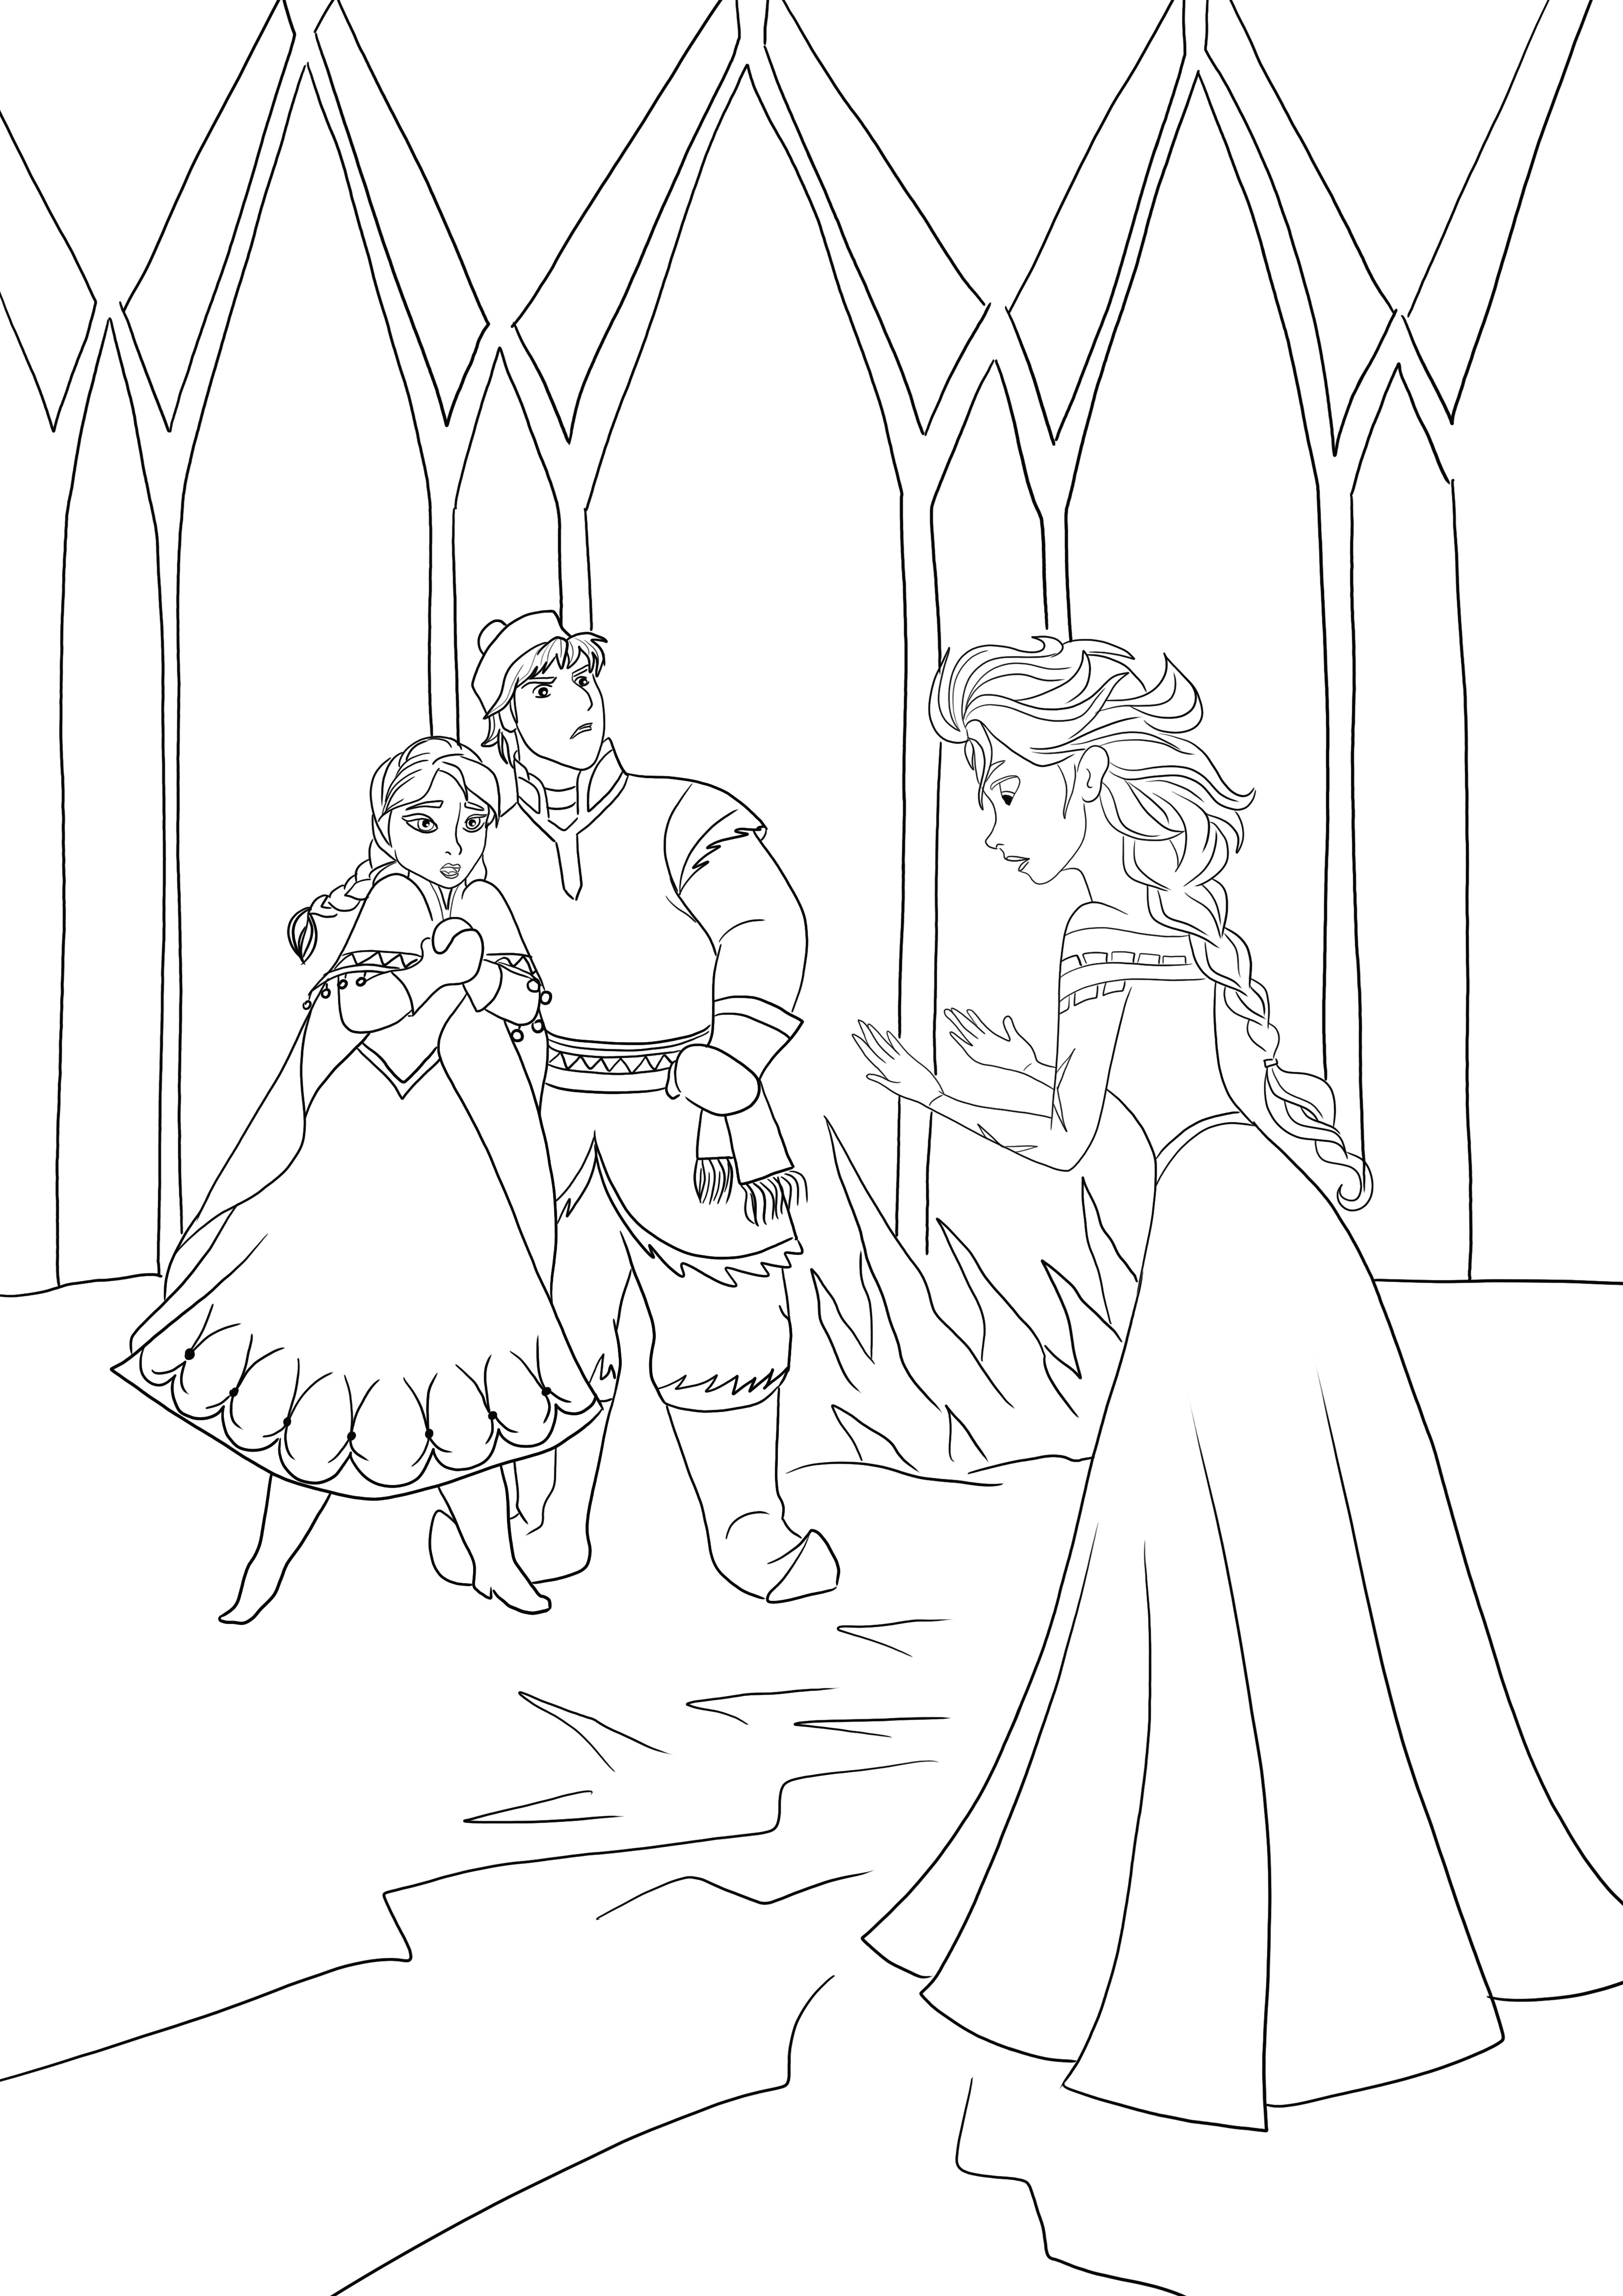 Elsa rejects Anna and Kristoff to print and color for free for kids of all ages